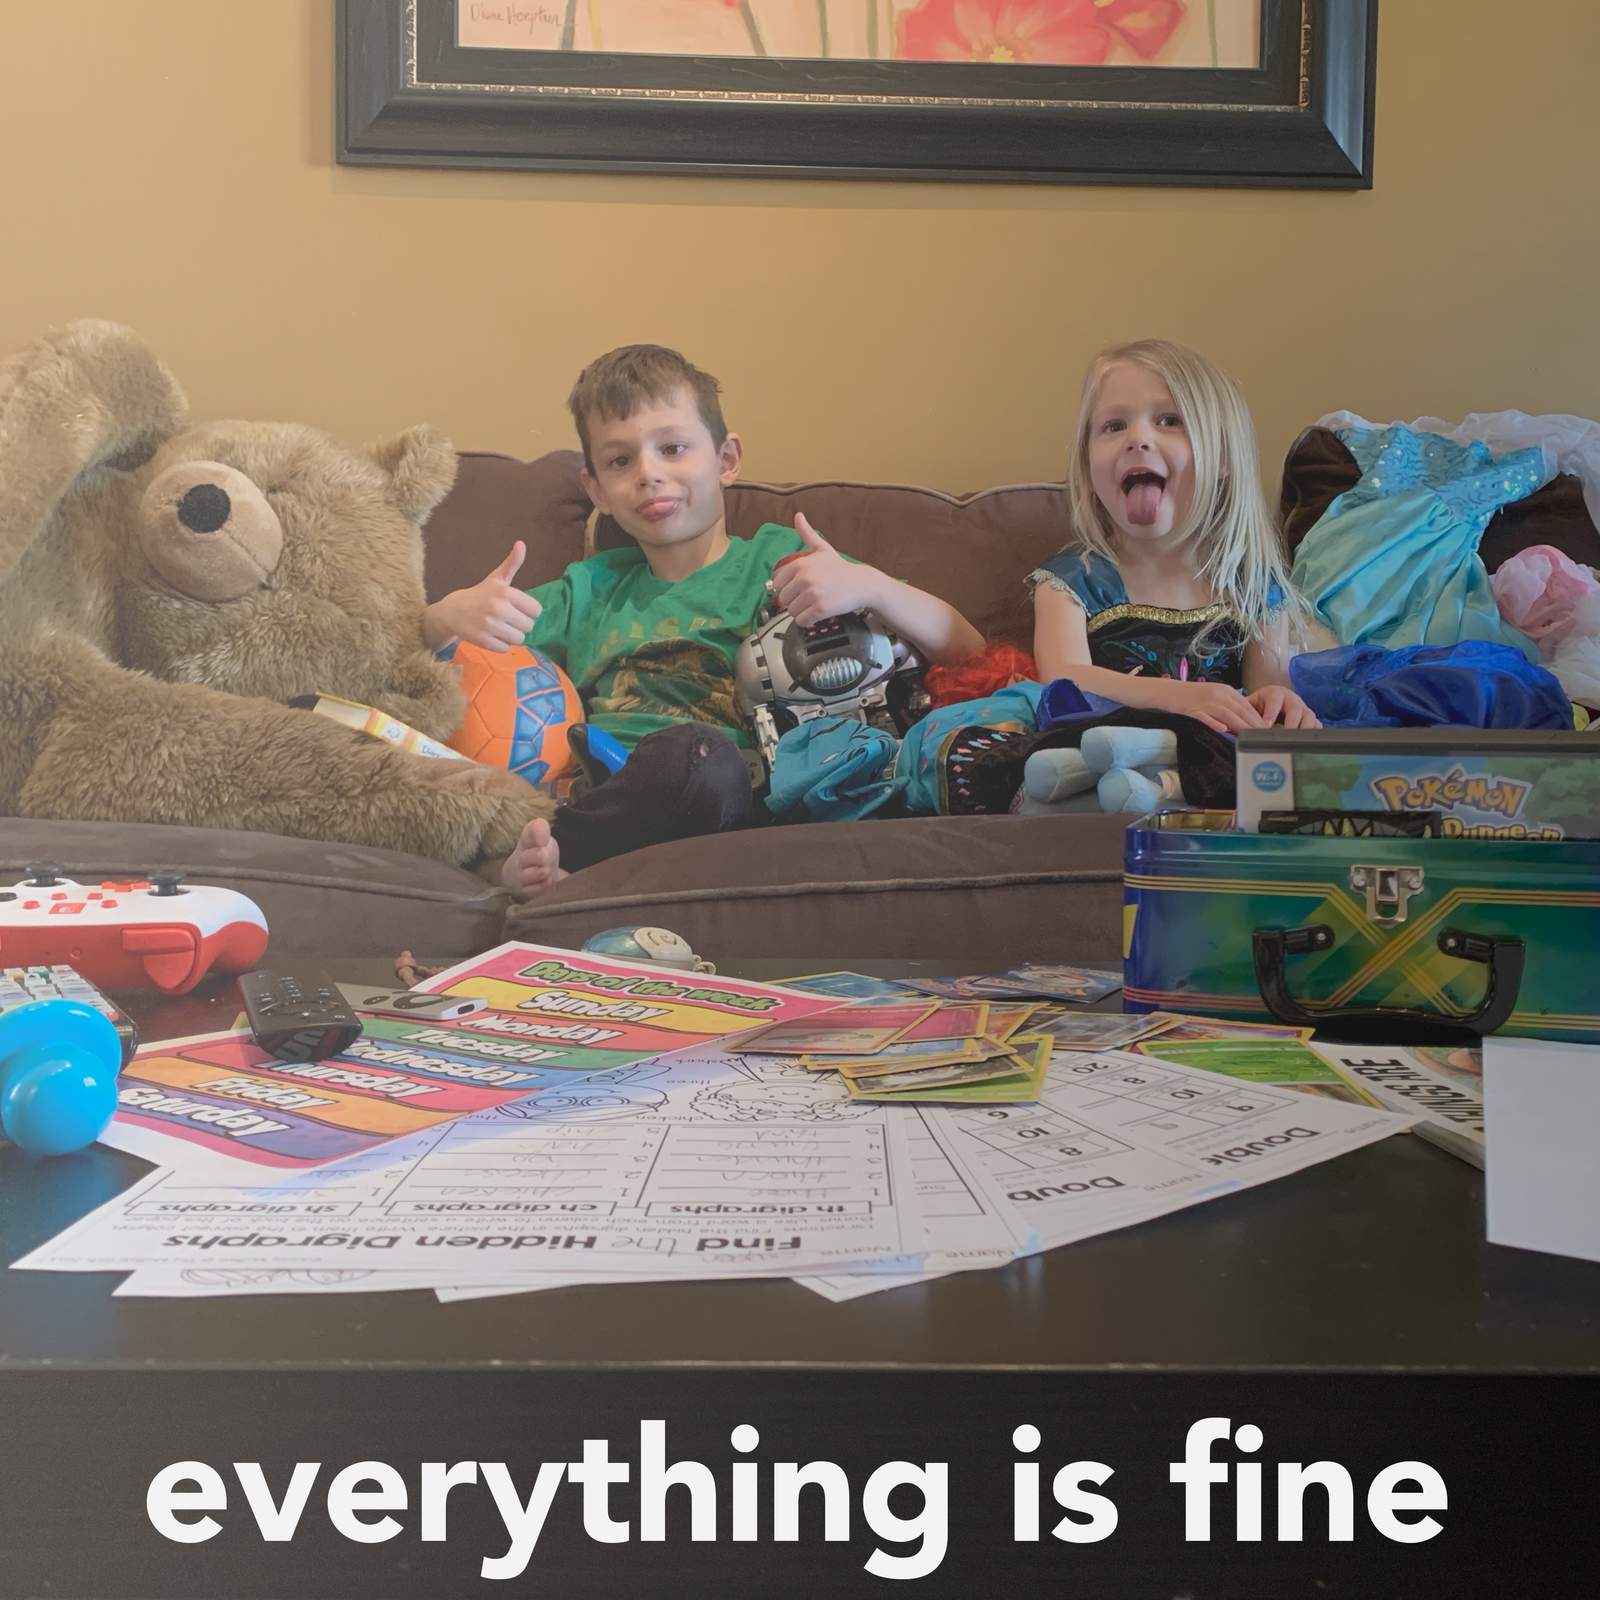 ‘Everything is Fine’: Searching for normalcy in upended family life